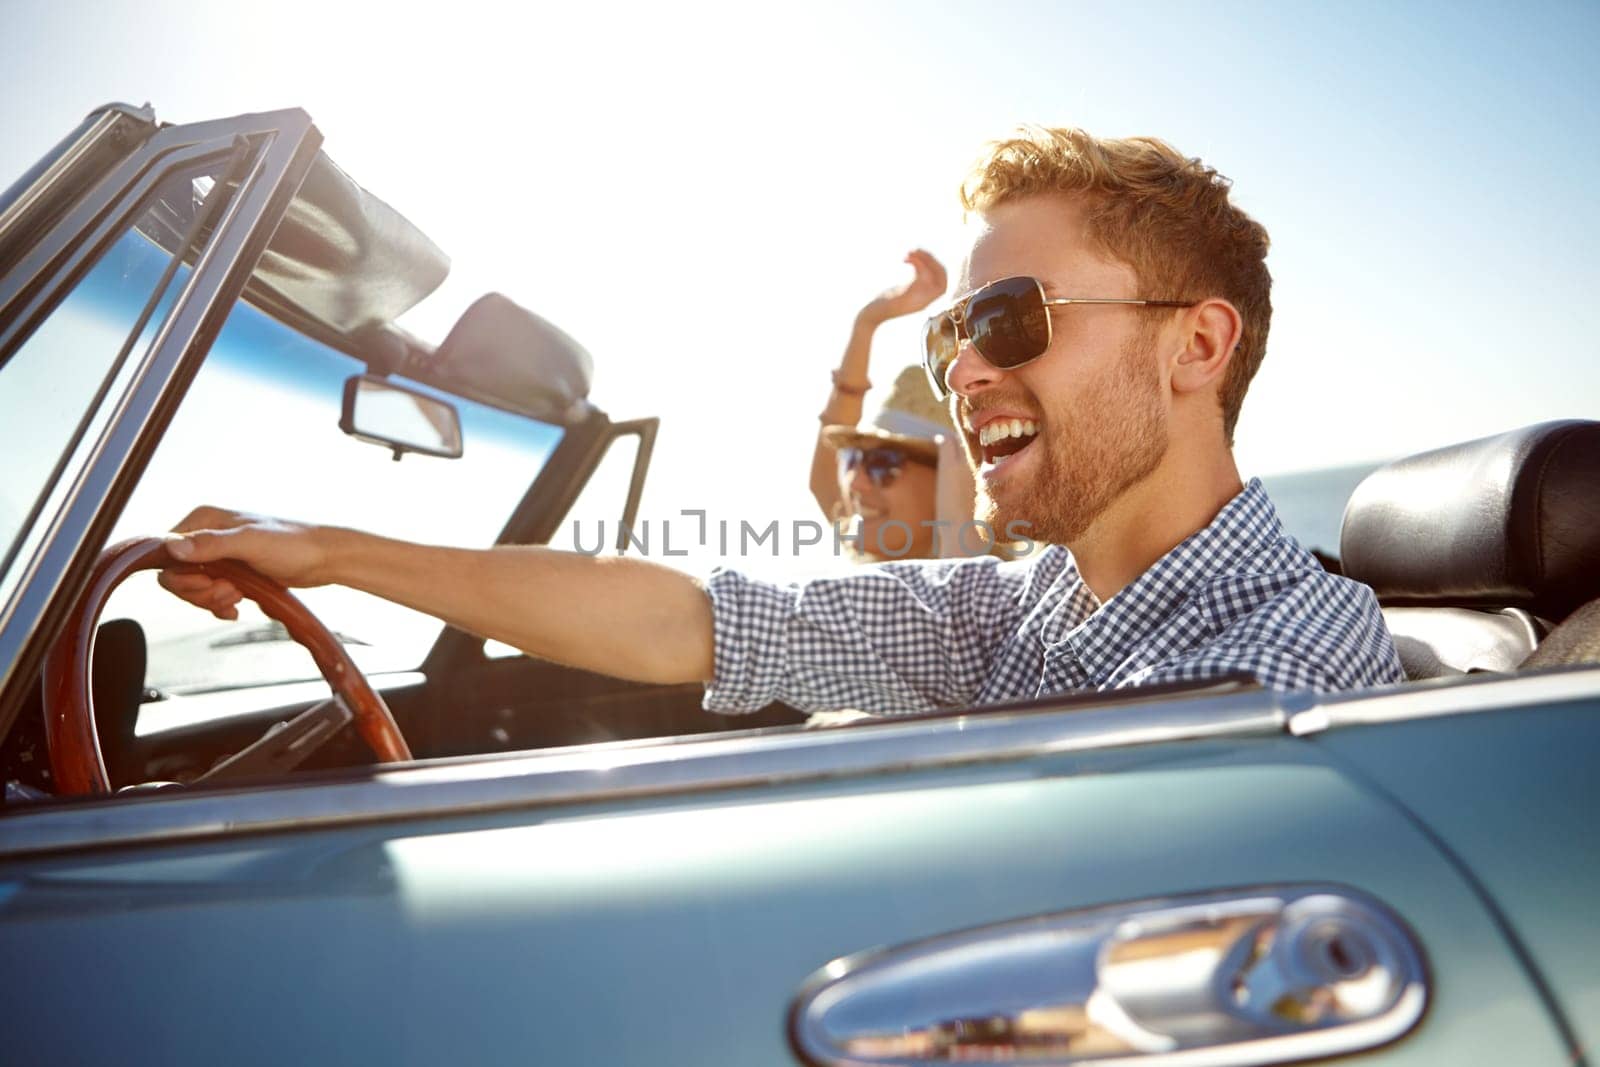 Car road trip, travel and fun happy couple on bonding holiday adventure, transportation journey or summer vacation. Love flare, convertible automobile and driver driving on Canada countryside tour.